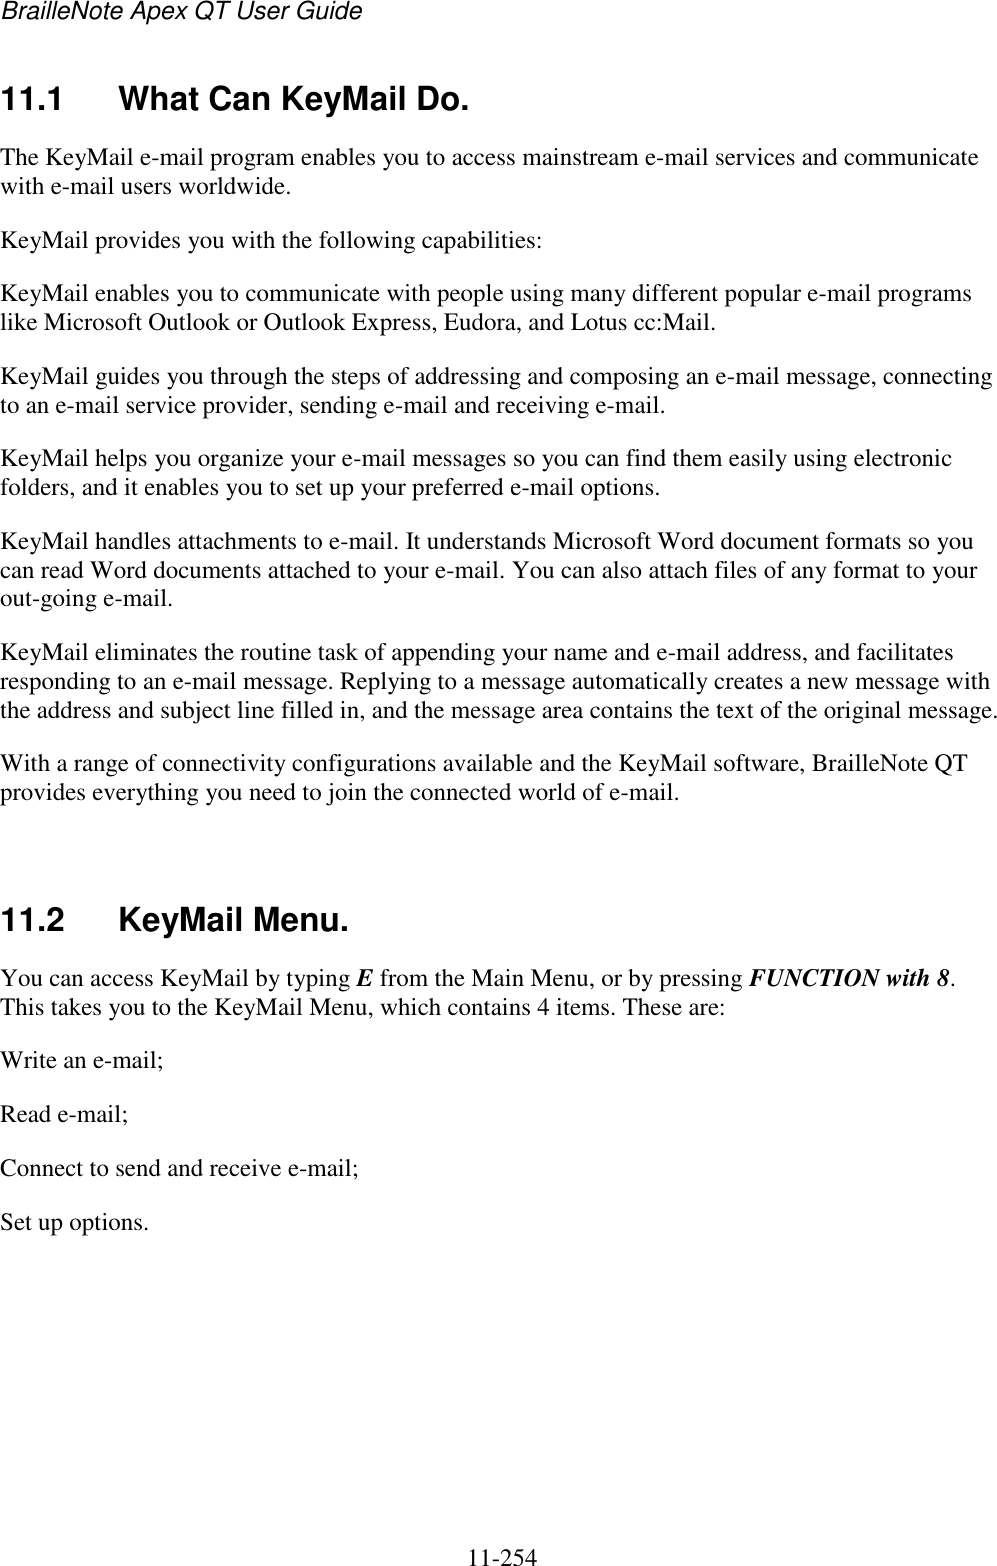 BrailleNote Apex QT User Guide  11-254   11.1  What Can KeyMail Do. The KeyMail e-mail program enables you to access mainstream e-mail services and communicate with e-mail users worldwide. KeyMail provides you with the following capabilities: KeyMail enables you to communicate with people using many different popular e-mail programs like Microsoft Outlook or Outlook Express, Eudora, and Lotus cc:Mail. KeyMail guides you through the steps of addressing and composing an e-mail message, connecting to an e-mail service provider, sending e-mail and receiving e-mail. KeyMail helps you organize your e-mail messages so you can find them easily using electronic folders, and it enables you to set up your preferred e-mail options. KeyMail handles attachments to e-mail. It understands Microsoft Word document formats so you can read Word documents attached to your e-mail. You can also attach files of any format to your out-going e-mail. KeyMail eliminates the routine task of appending your name and e-mail address, and facilitates responding to an e-mail message. Replying to a message automatically creates a new message with the address and subject line filled in, and the message area contains the text of the original message. With a range of connectivity configurations available and the KeyMail software, BrailleNote QT provides everything you need to join the connected world of e-mail.   11.2  KeyMail Menu. You can access KeyMail by typing E from the Main Menu, or by pressing FUNCTION with 8. This takes you to the KeyMail Menu, which contains 4 items. These are: Write an e-mail; Read e-mail; Connect to send and receive e-mail; Set up options.   